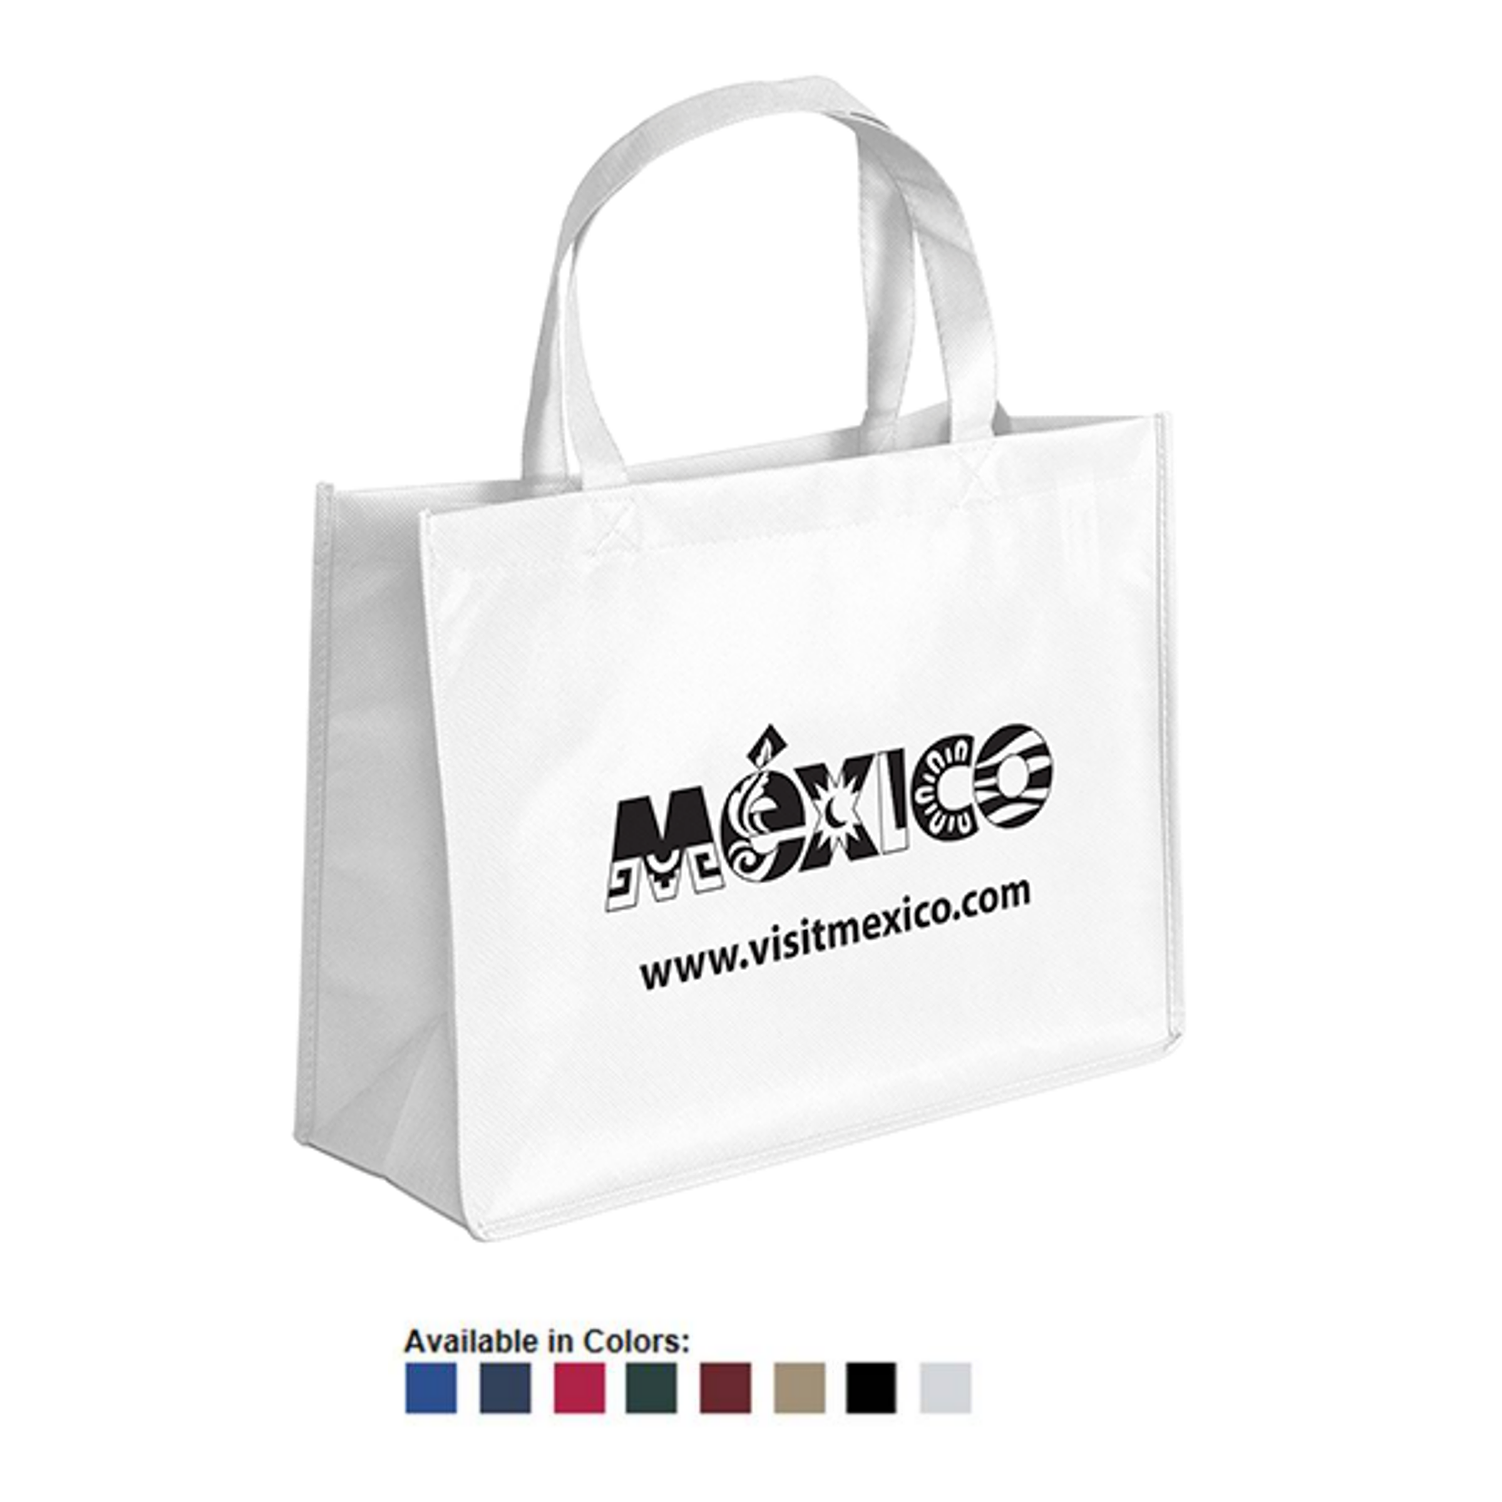 Recycled Tote | Sizes: 16x6x12